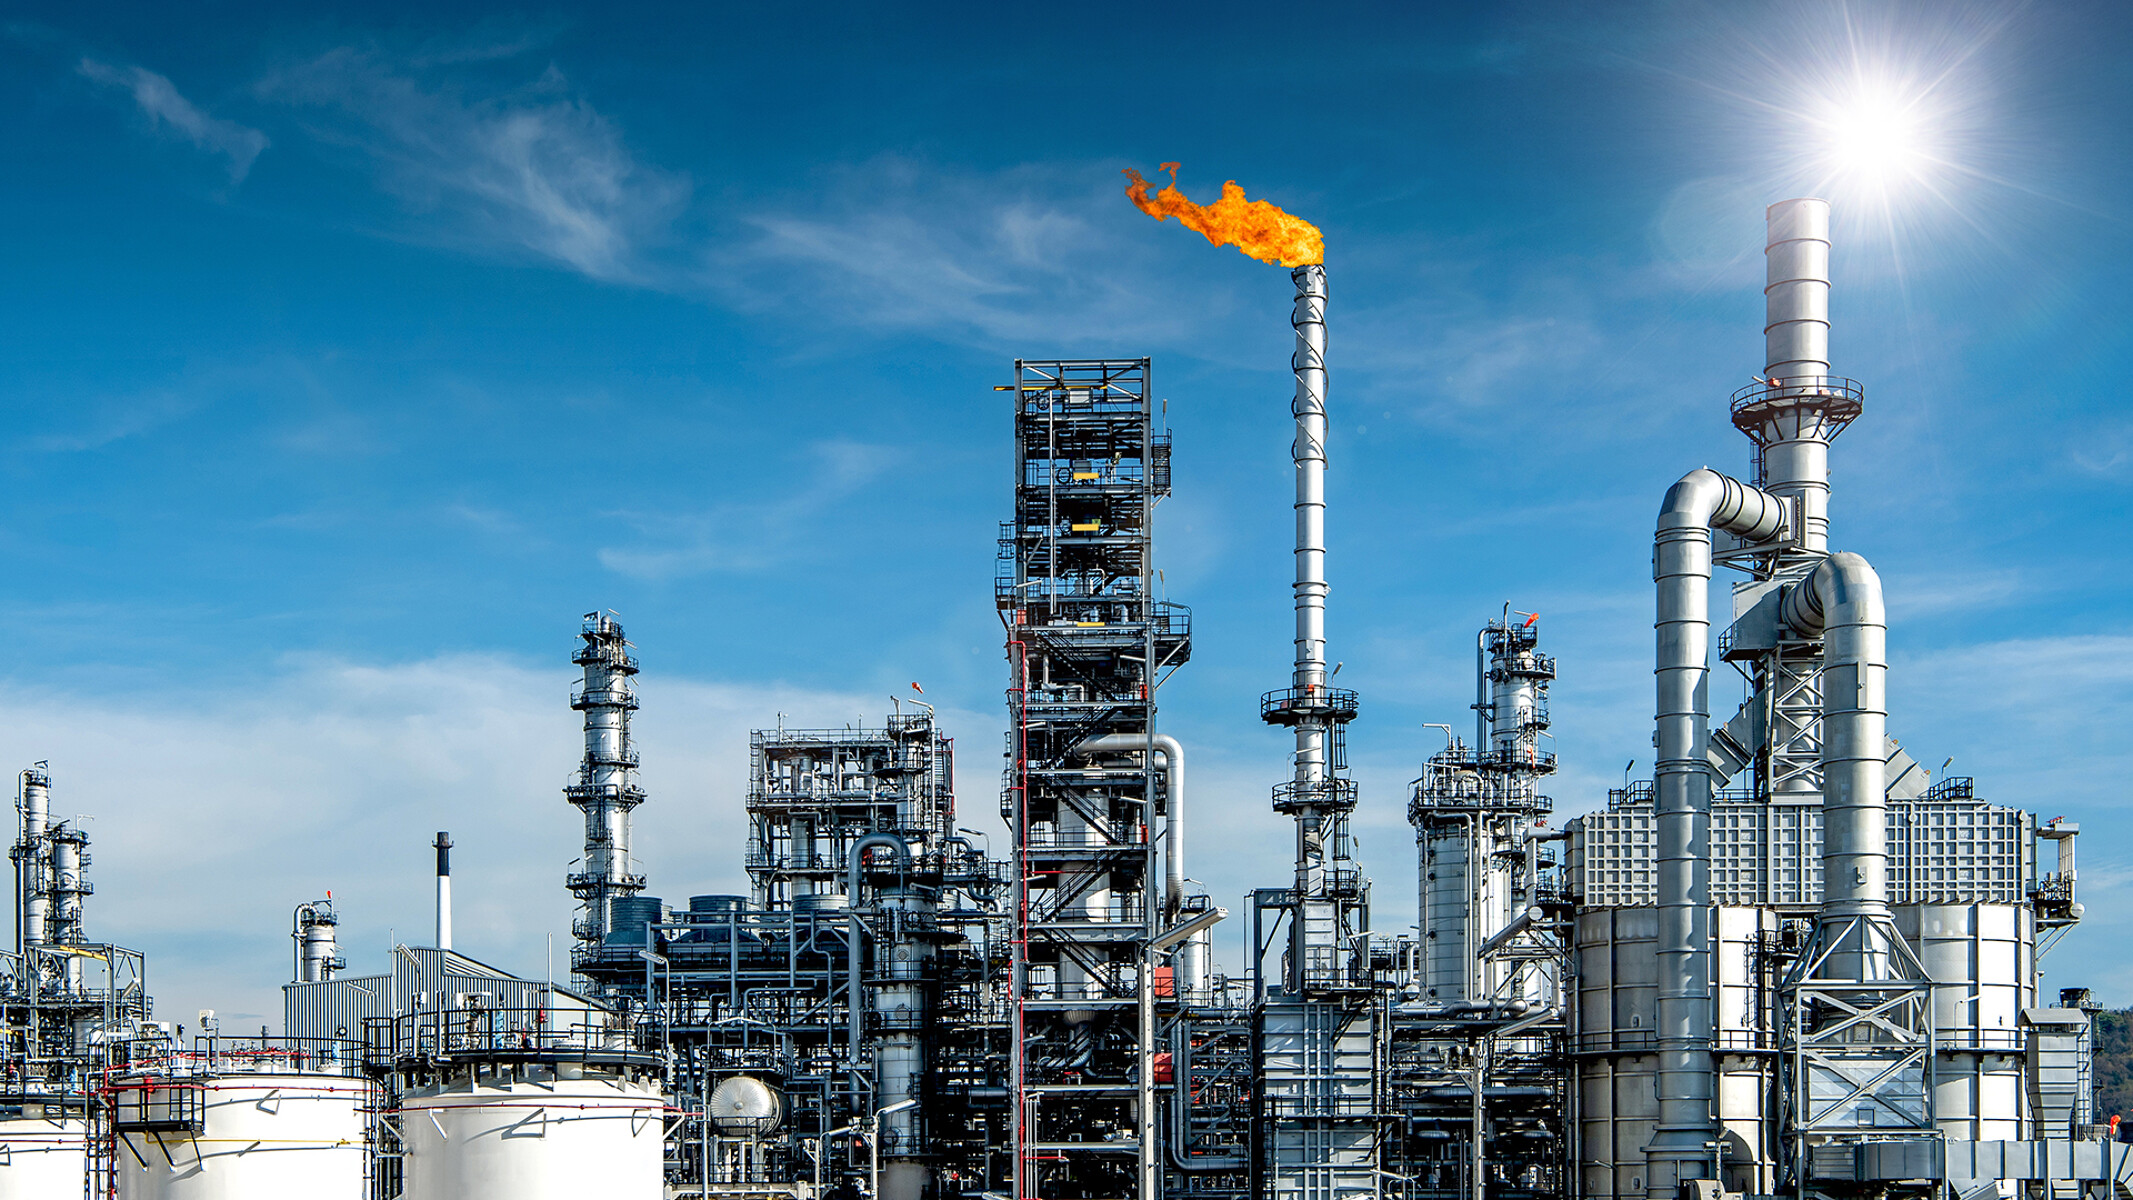 Large oil refinery complex with an orange flare at the centre set against a bright blue sky